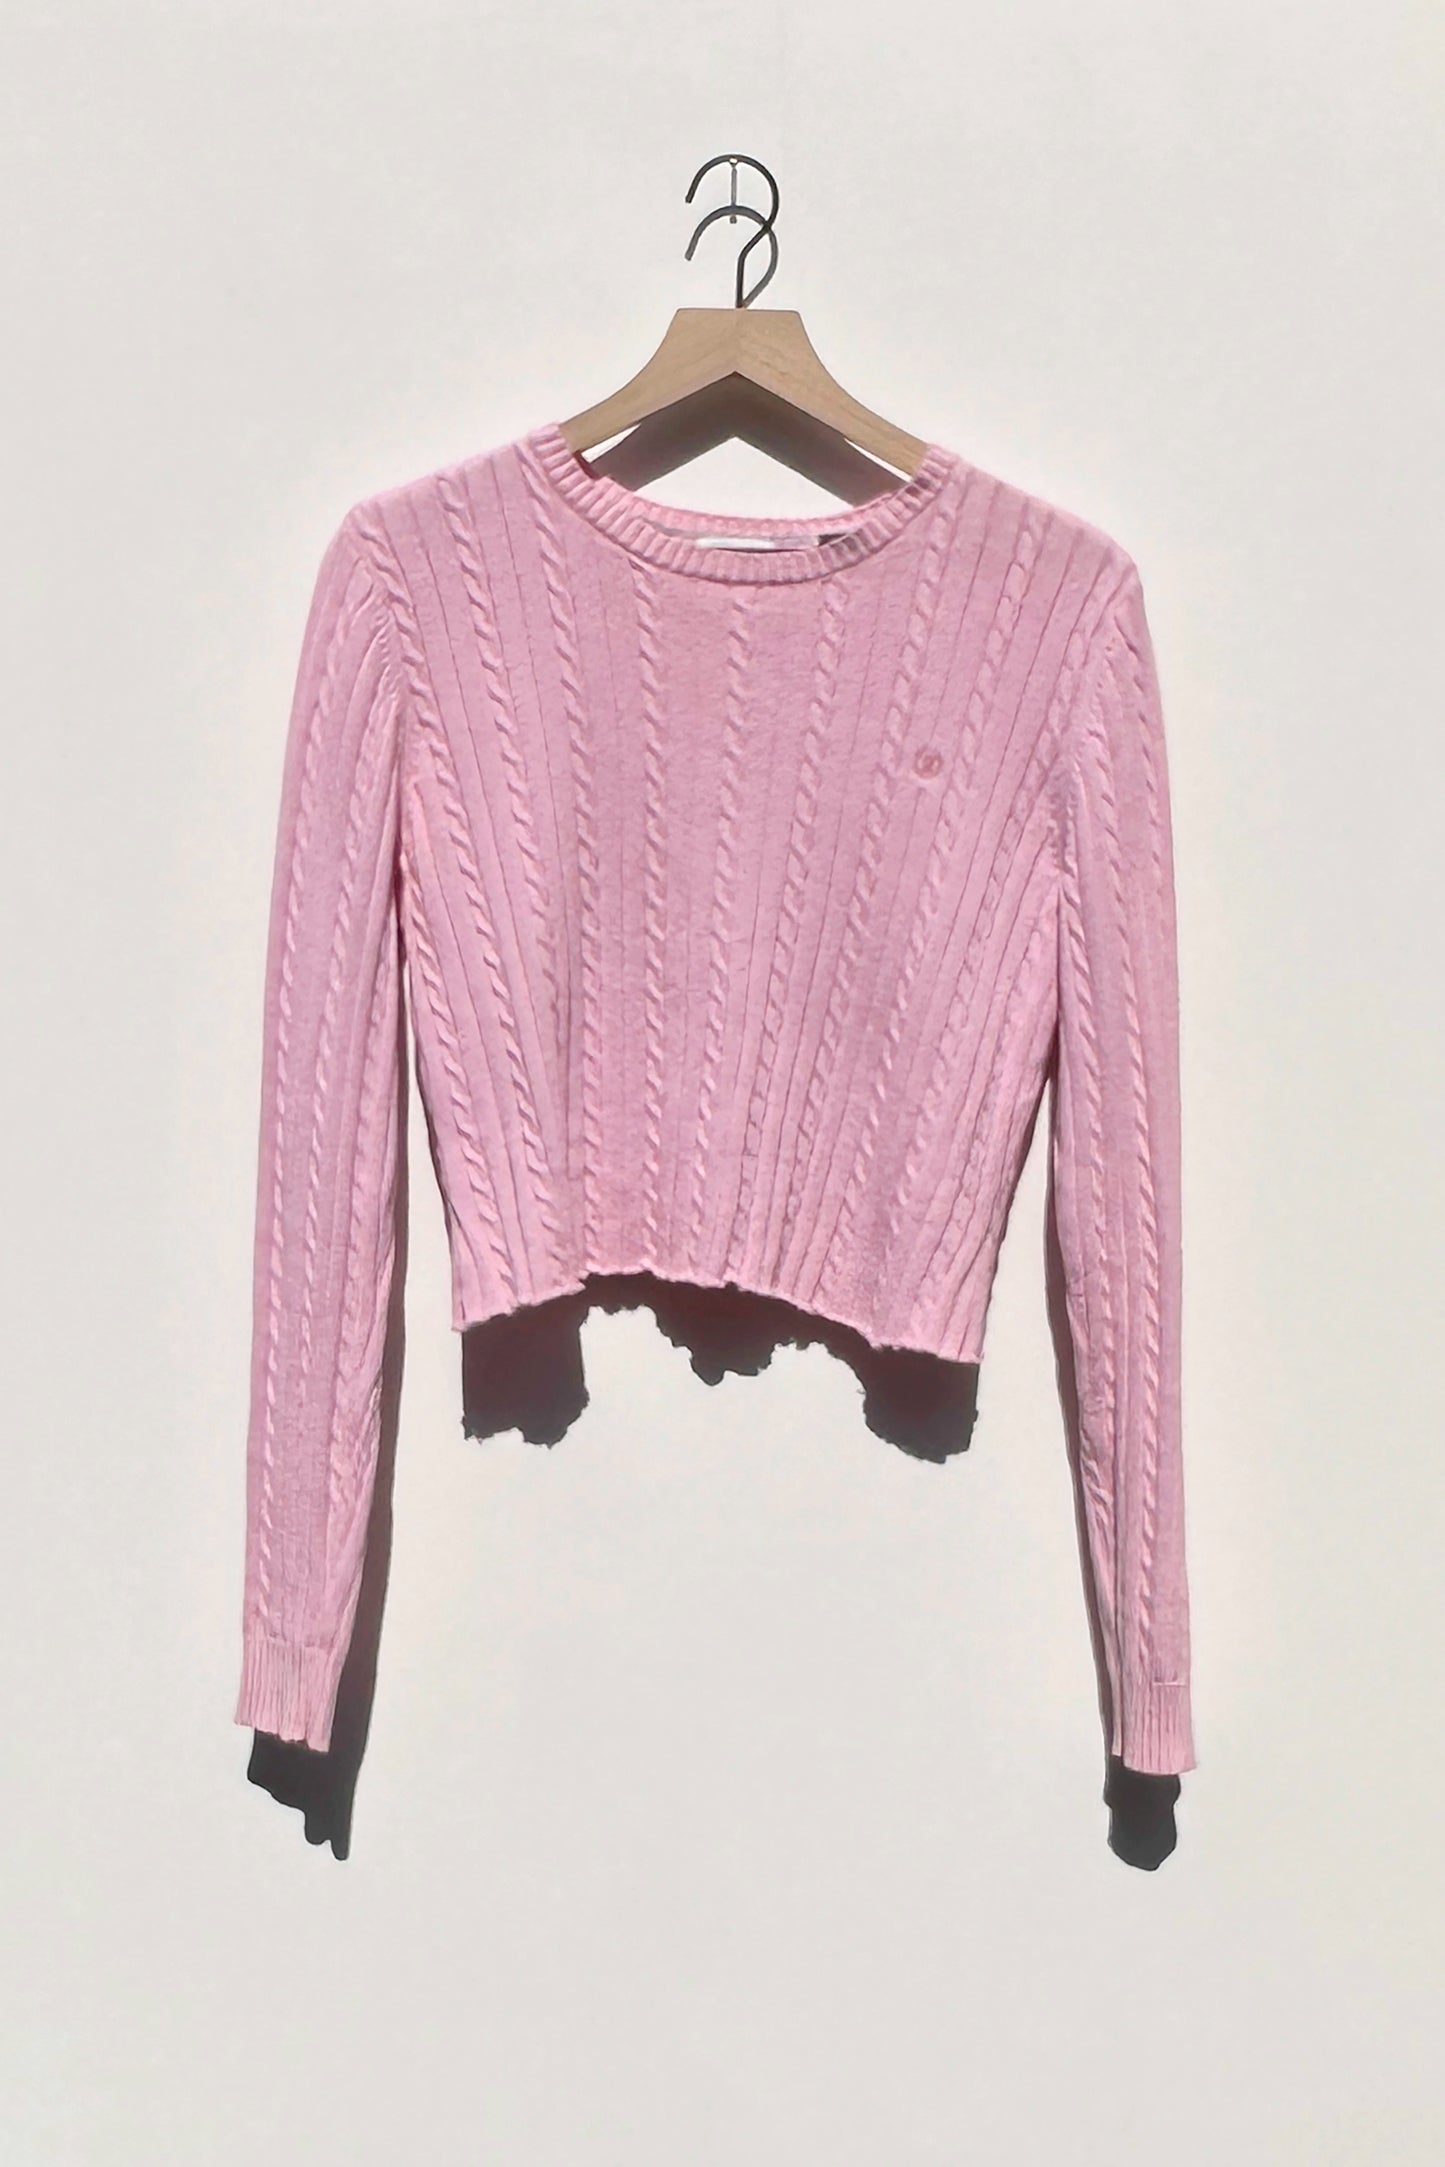 IZOD Bubblegum Pink Cable Knit Cropped Sweater